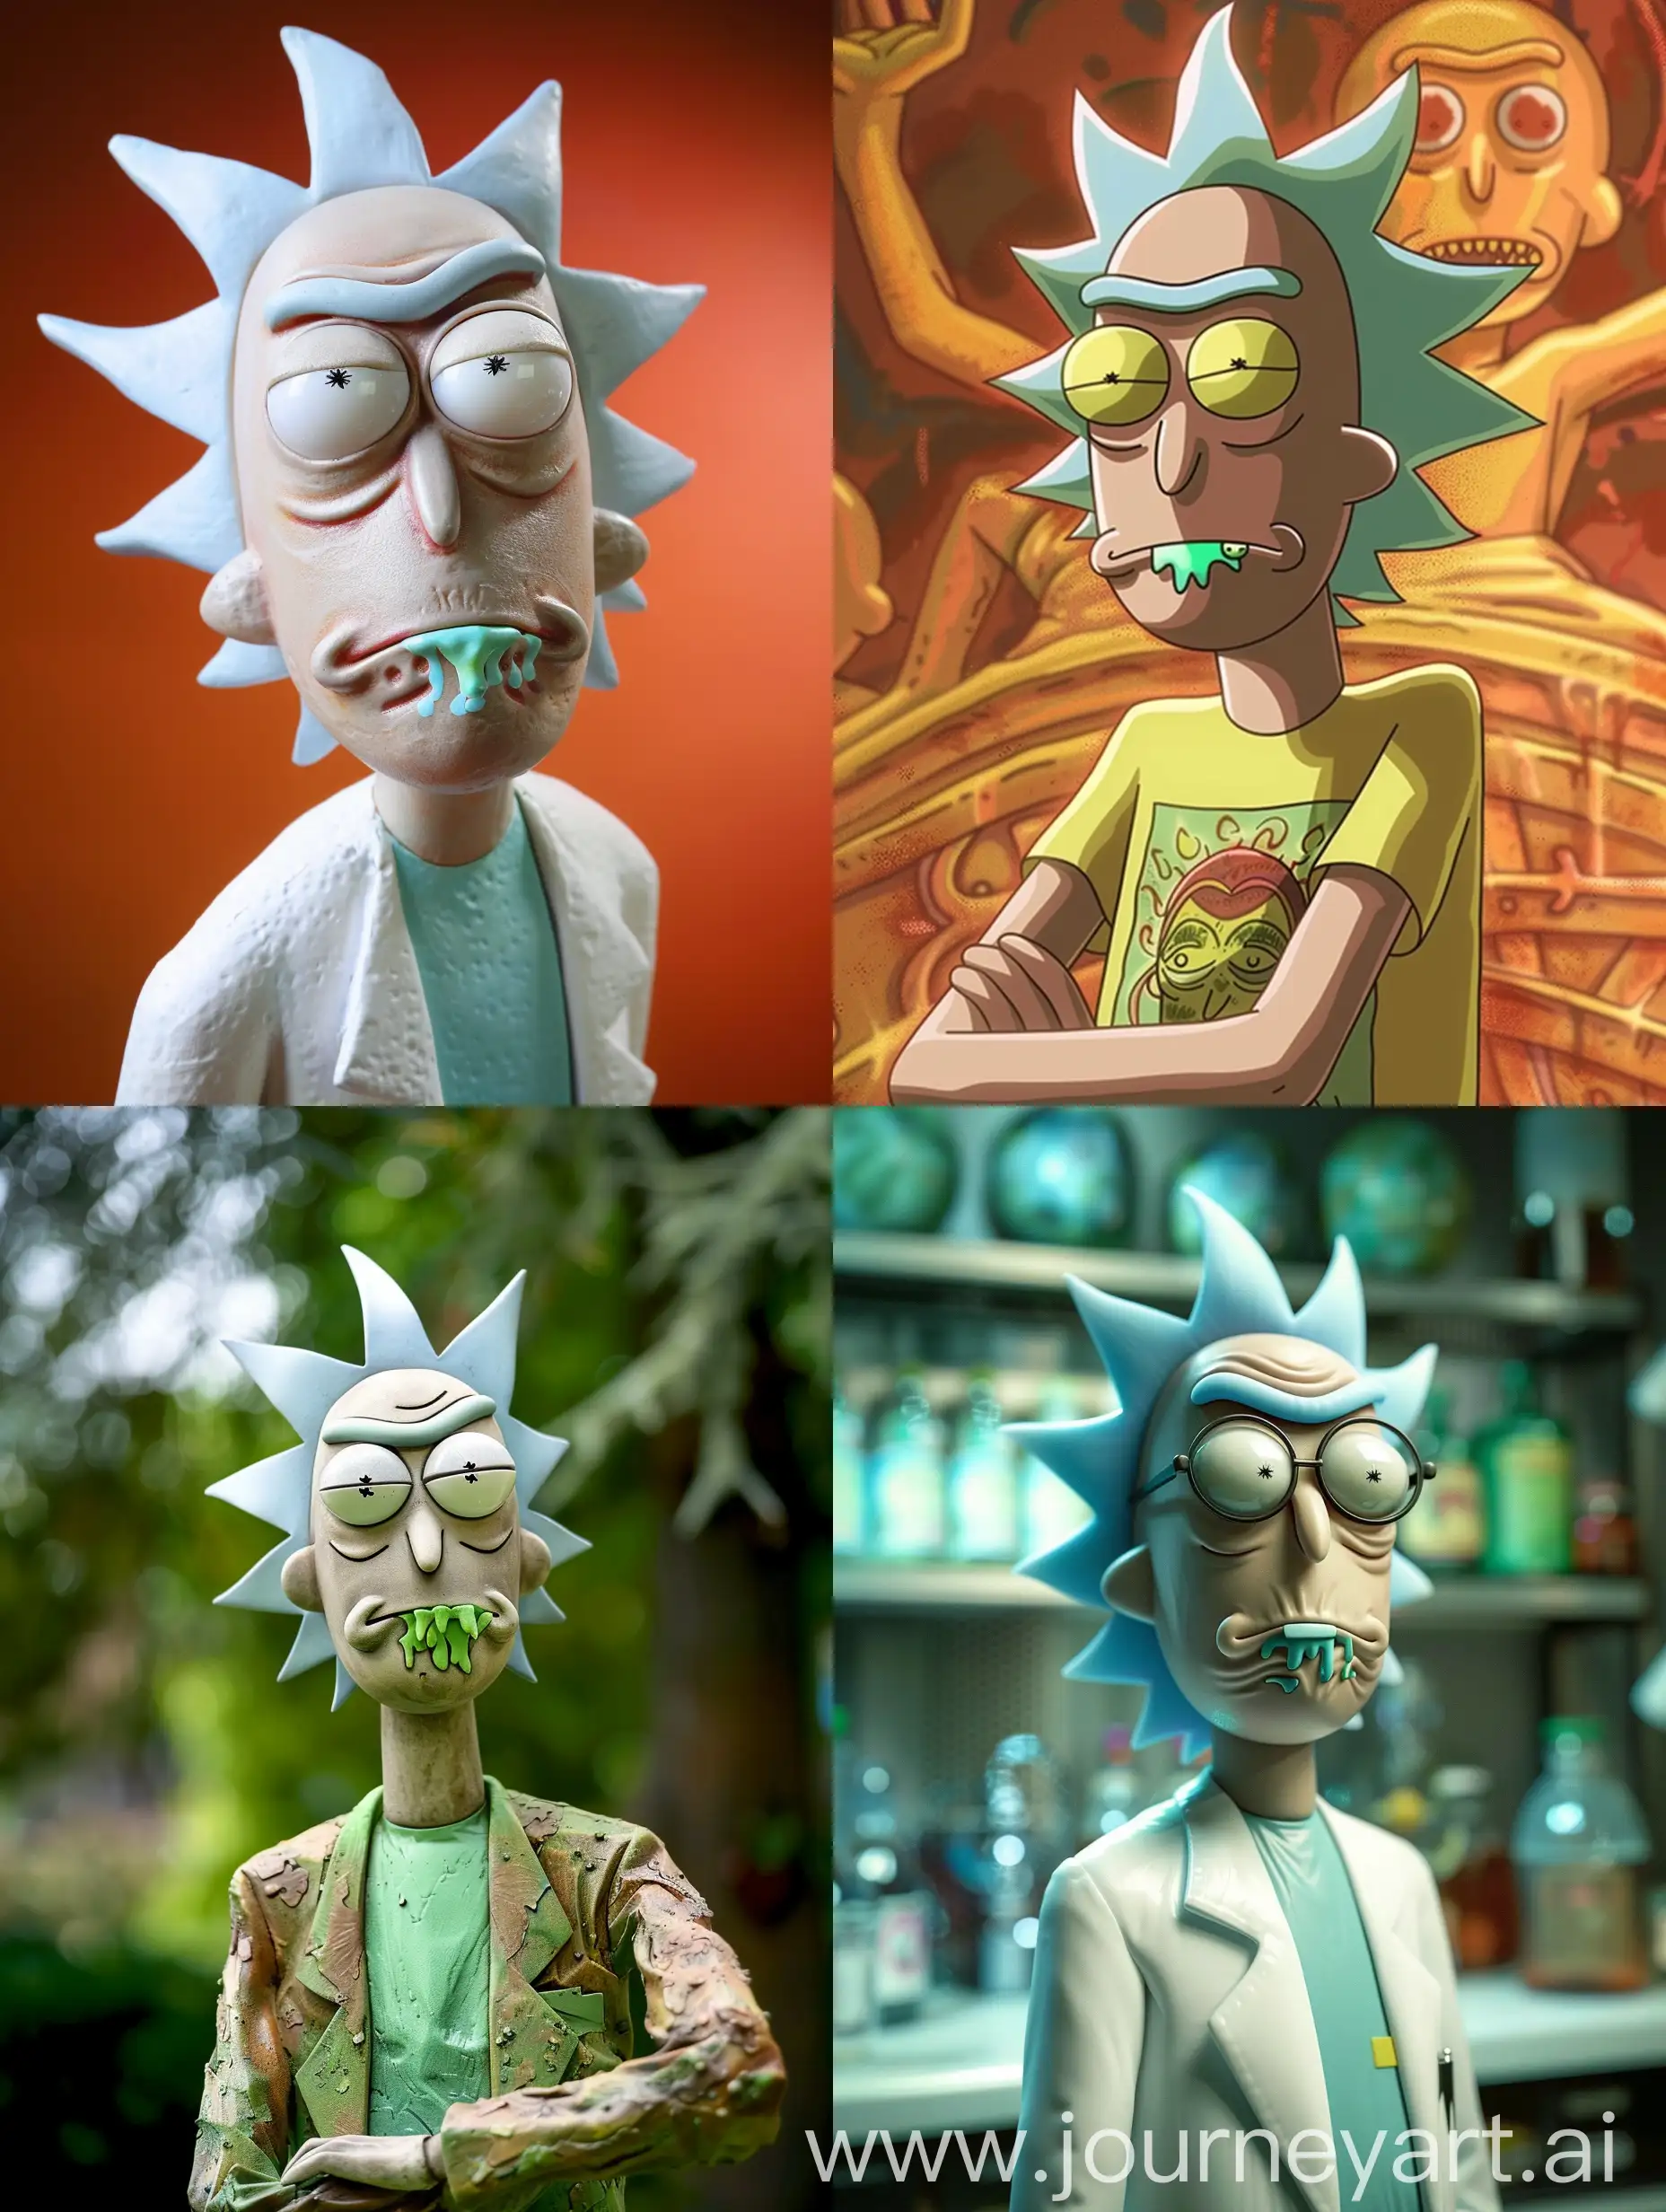 Rick-Sanchez-from-Rick-and-Morty-Series-Dynamic-Portrait-with-SciFi-Vibe